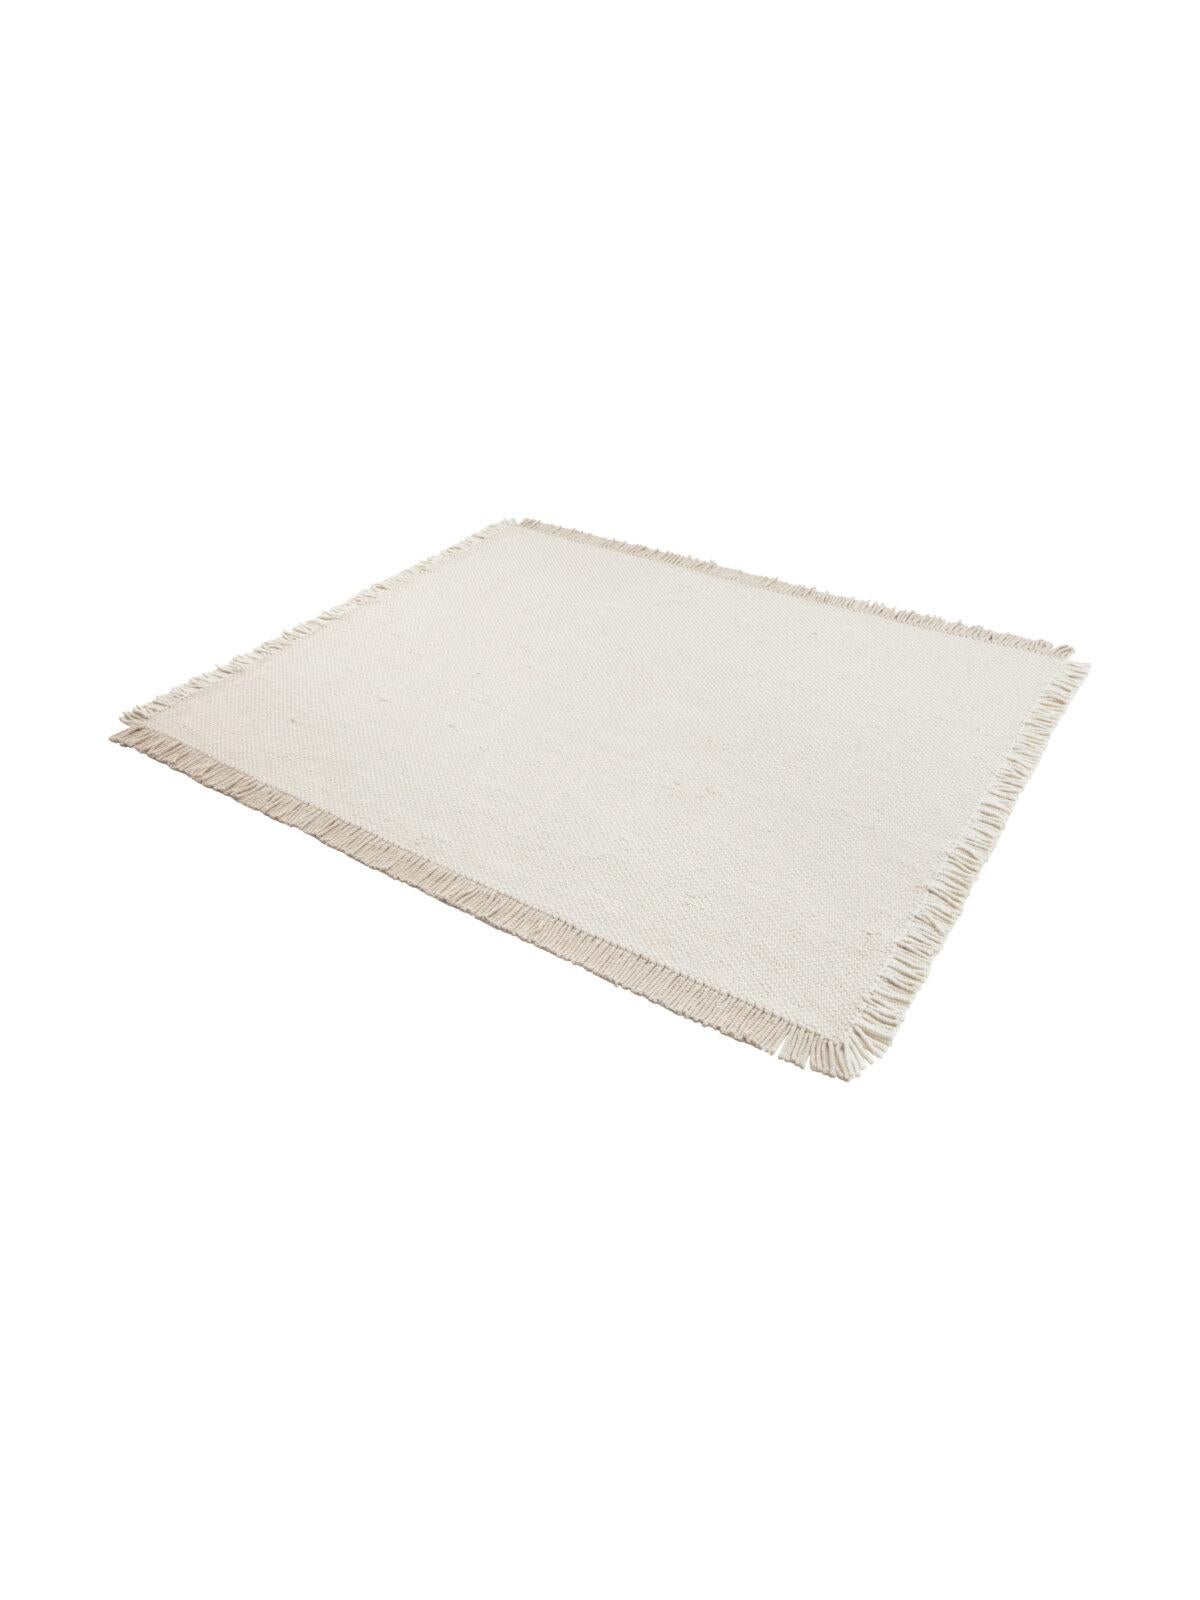 cc-tapis EVERYDAY COLLECTION - NIGHT handmade rug In New Condition For Sale In Brooklyn, NY